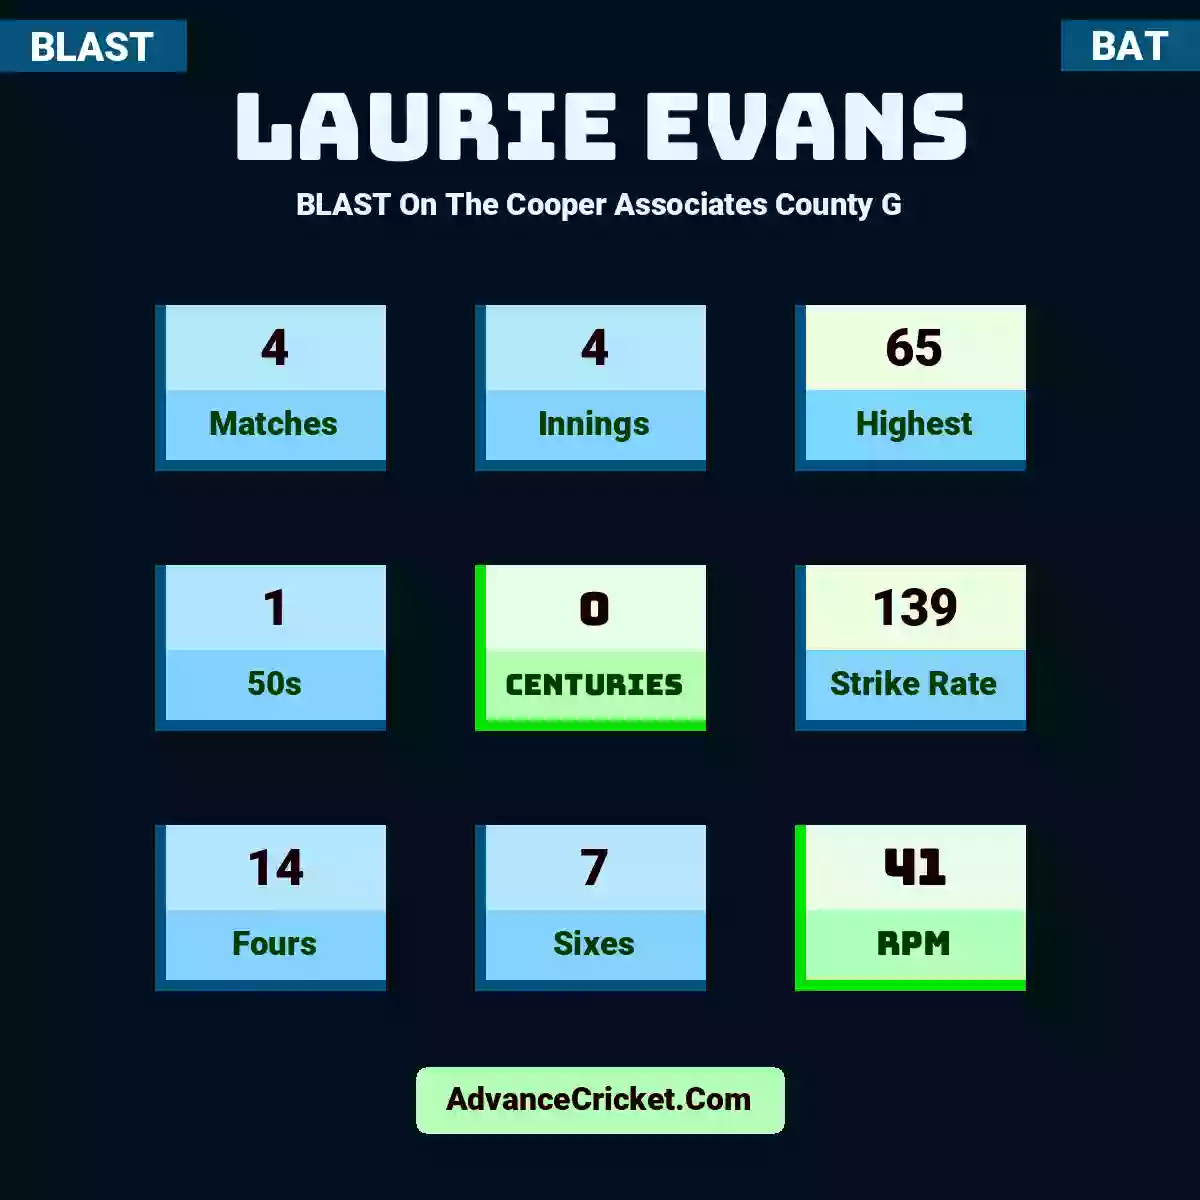 Laurie Evans BLAST  On The Cooper Associates County G, Laurie Evans played 4 matches, scored 65 runs as highest, 1 half-centuries, and 0 centuries, with a strike rate of 139. L.Evans hit 14 fours and 7 sixes, with an RPM of 41.